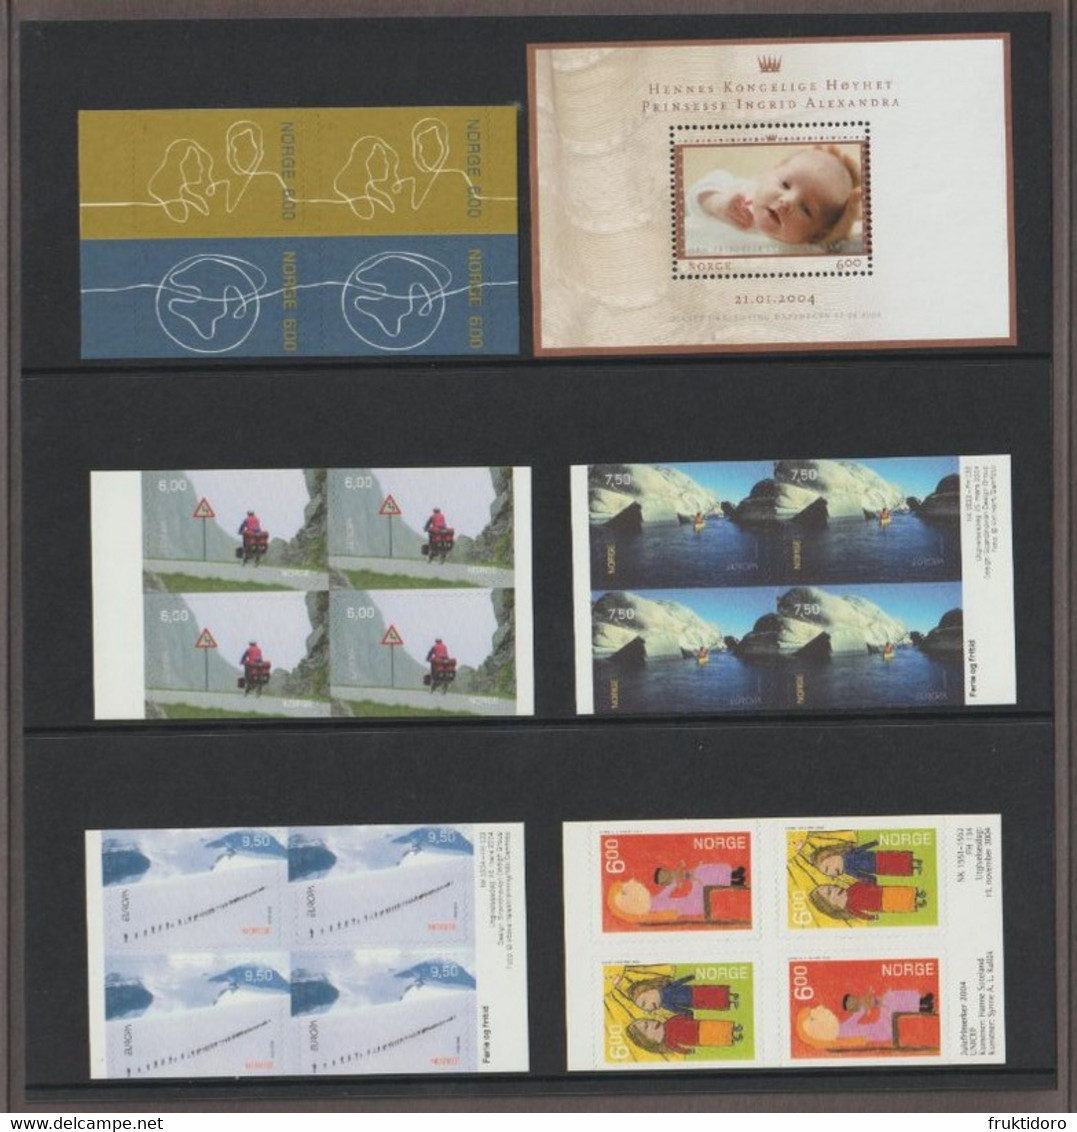 Norway Year Set Norwegian Stamps 2004 - Marine Life - Oslo Fjord - Cycling - Mythology - Princess Ingrid Alexandra - Années Complètes